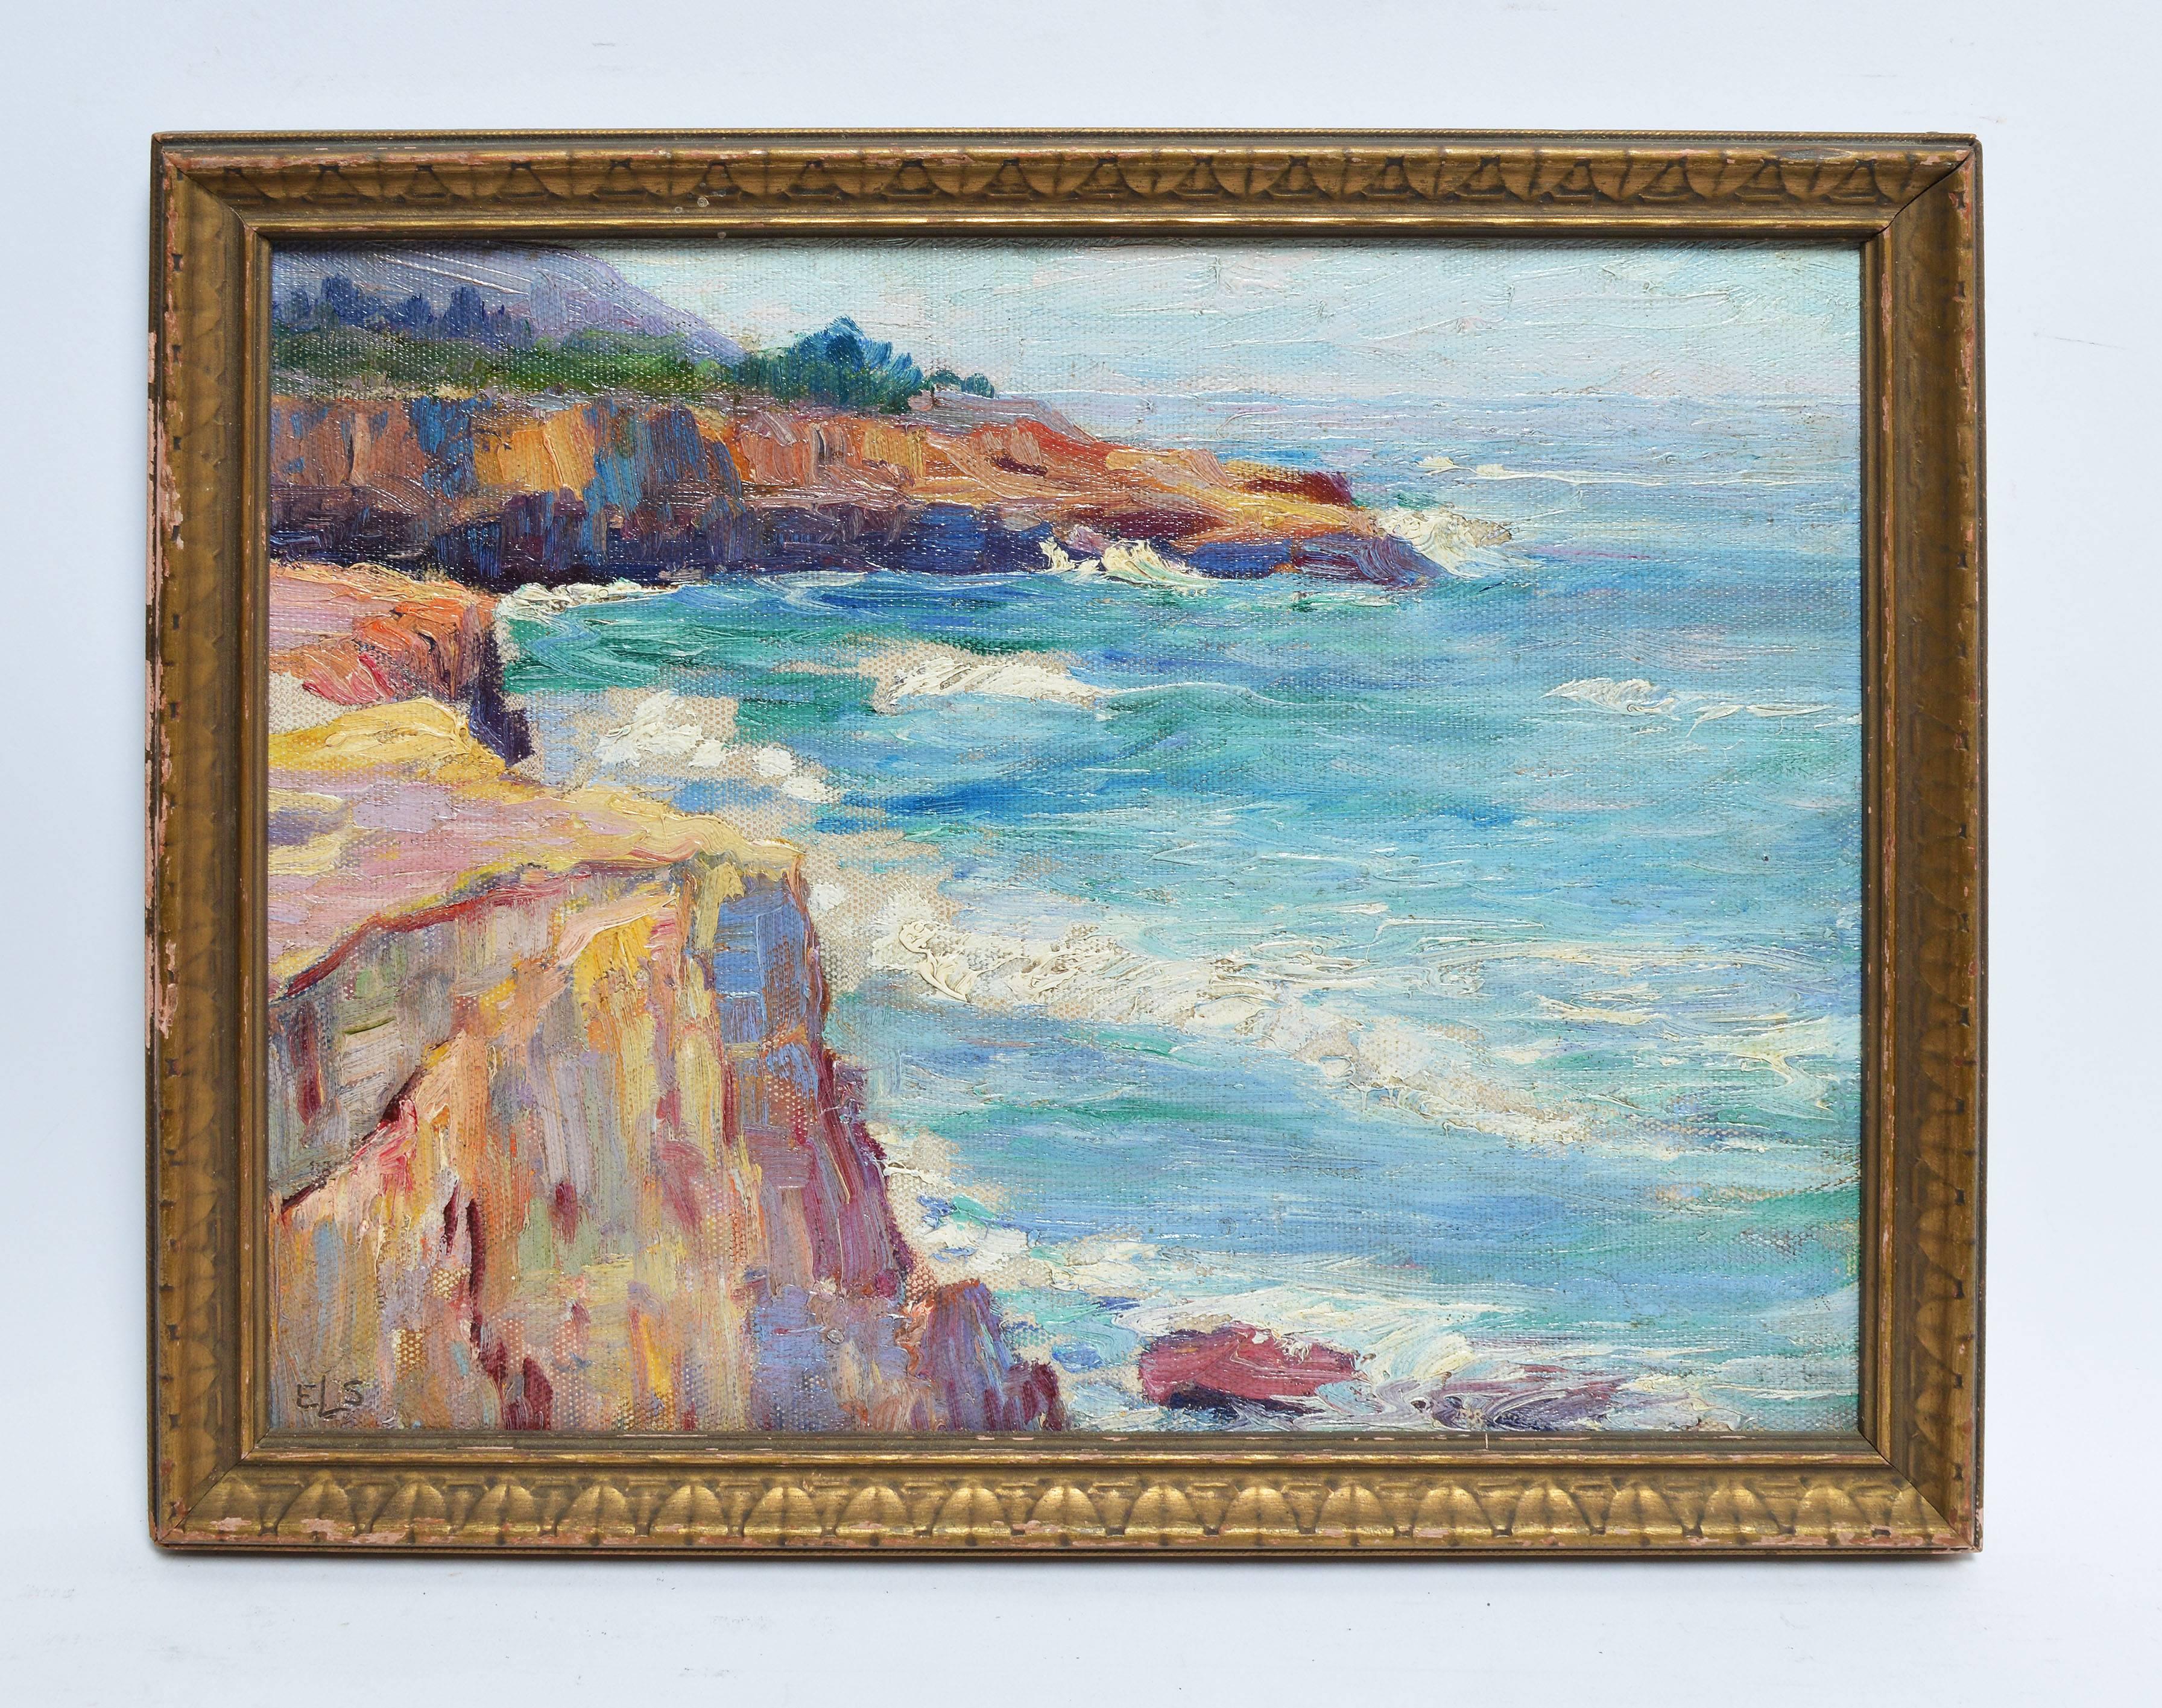 Crashing Waves at Point Loma Cliffs San Diego California - Painting by Unknown